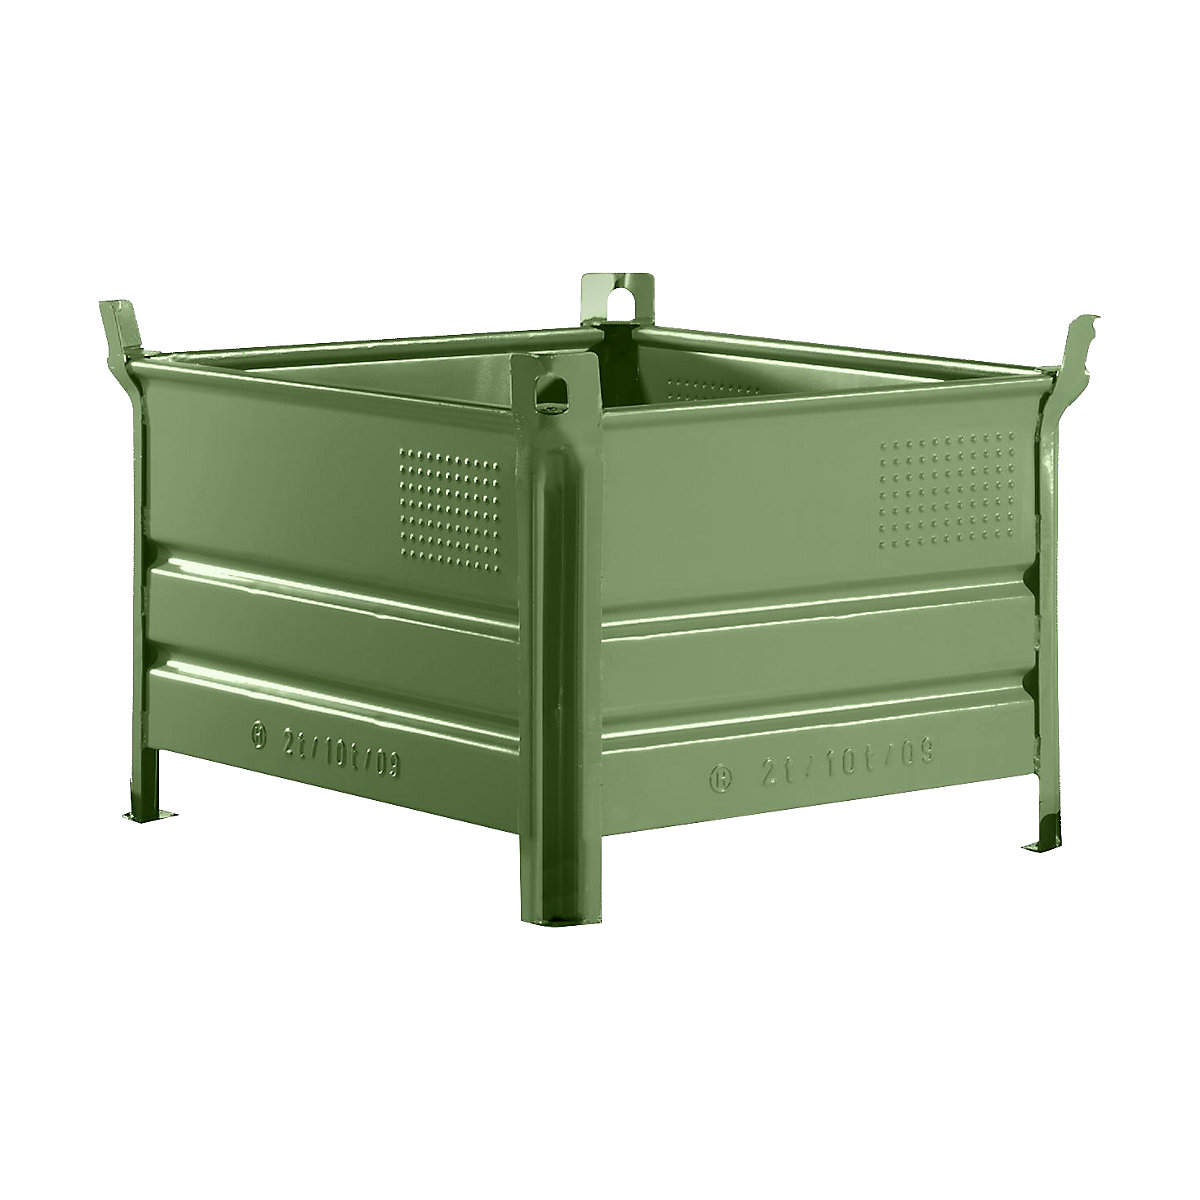 Stacking container with runners – Heson, LxW 1000 x 800 mm, max. load 2000 kg, green, 5+ items-2